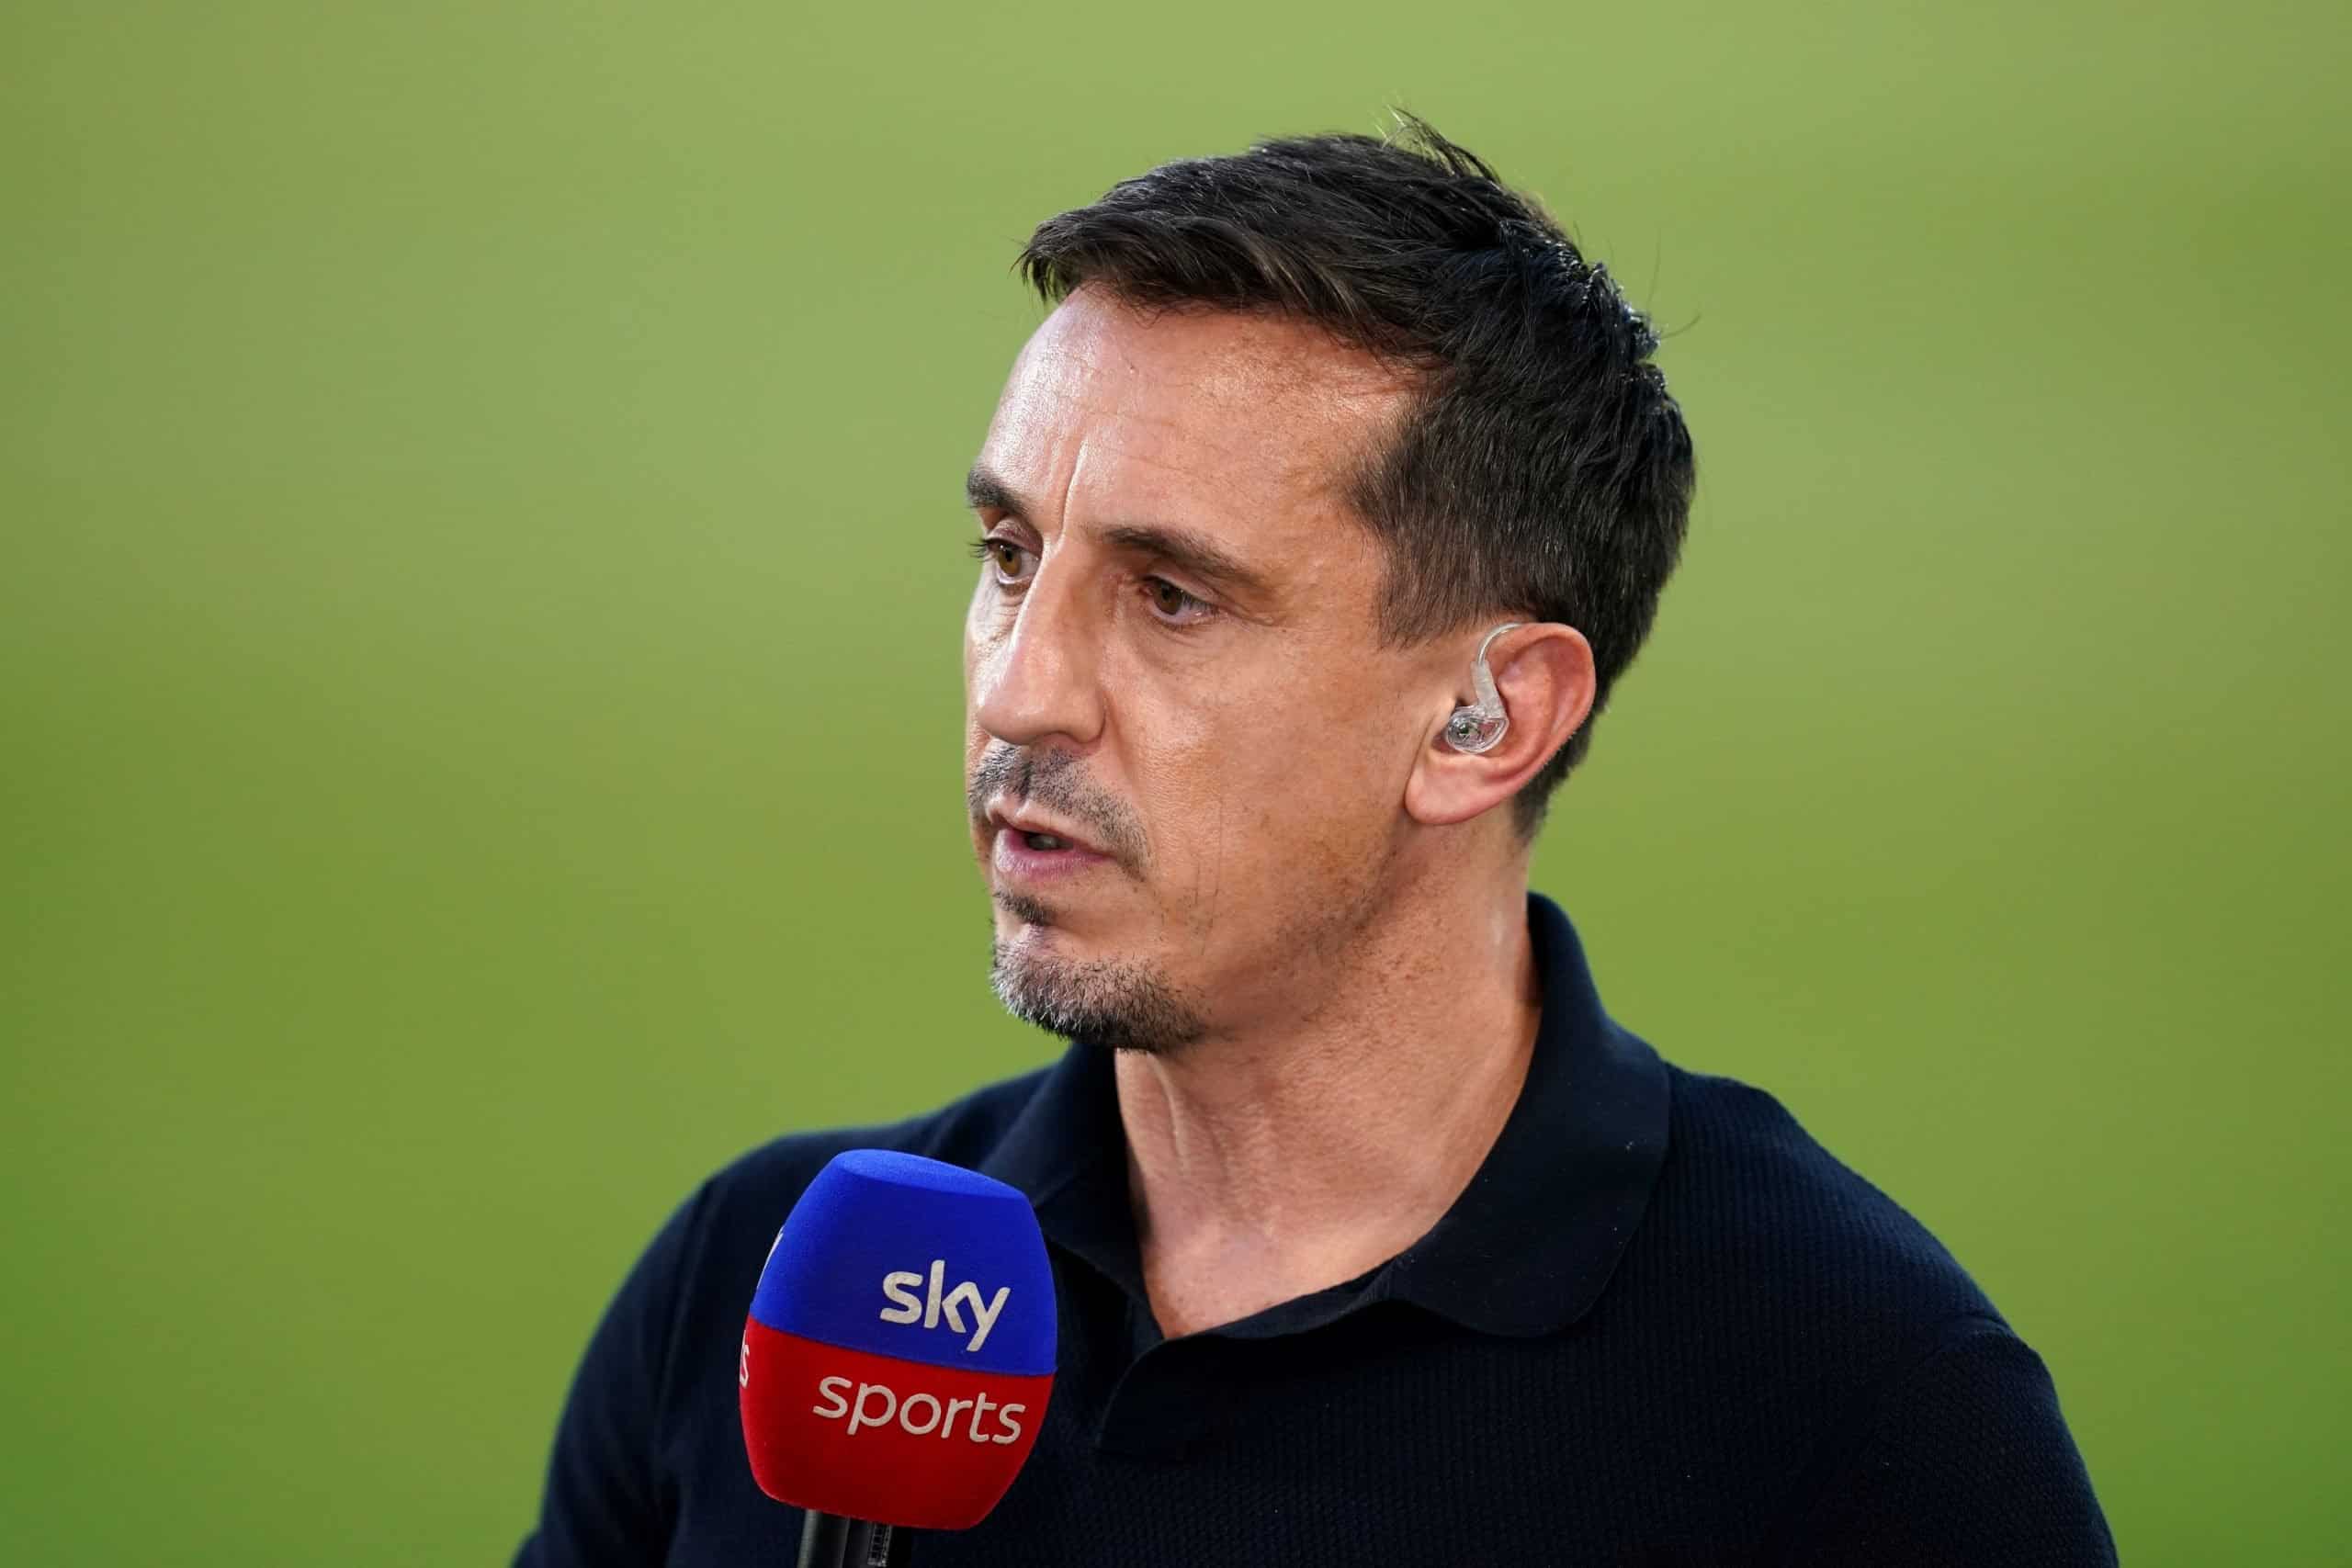 Watch: This is Manchester United! Gary Neville’s joke as they take on Liverpool